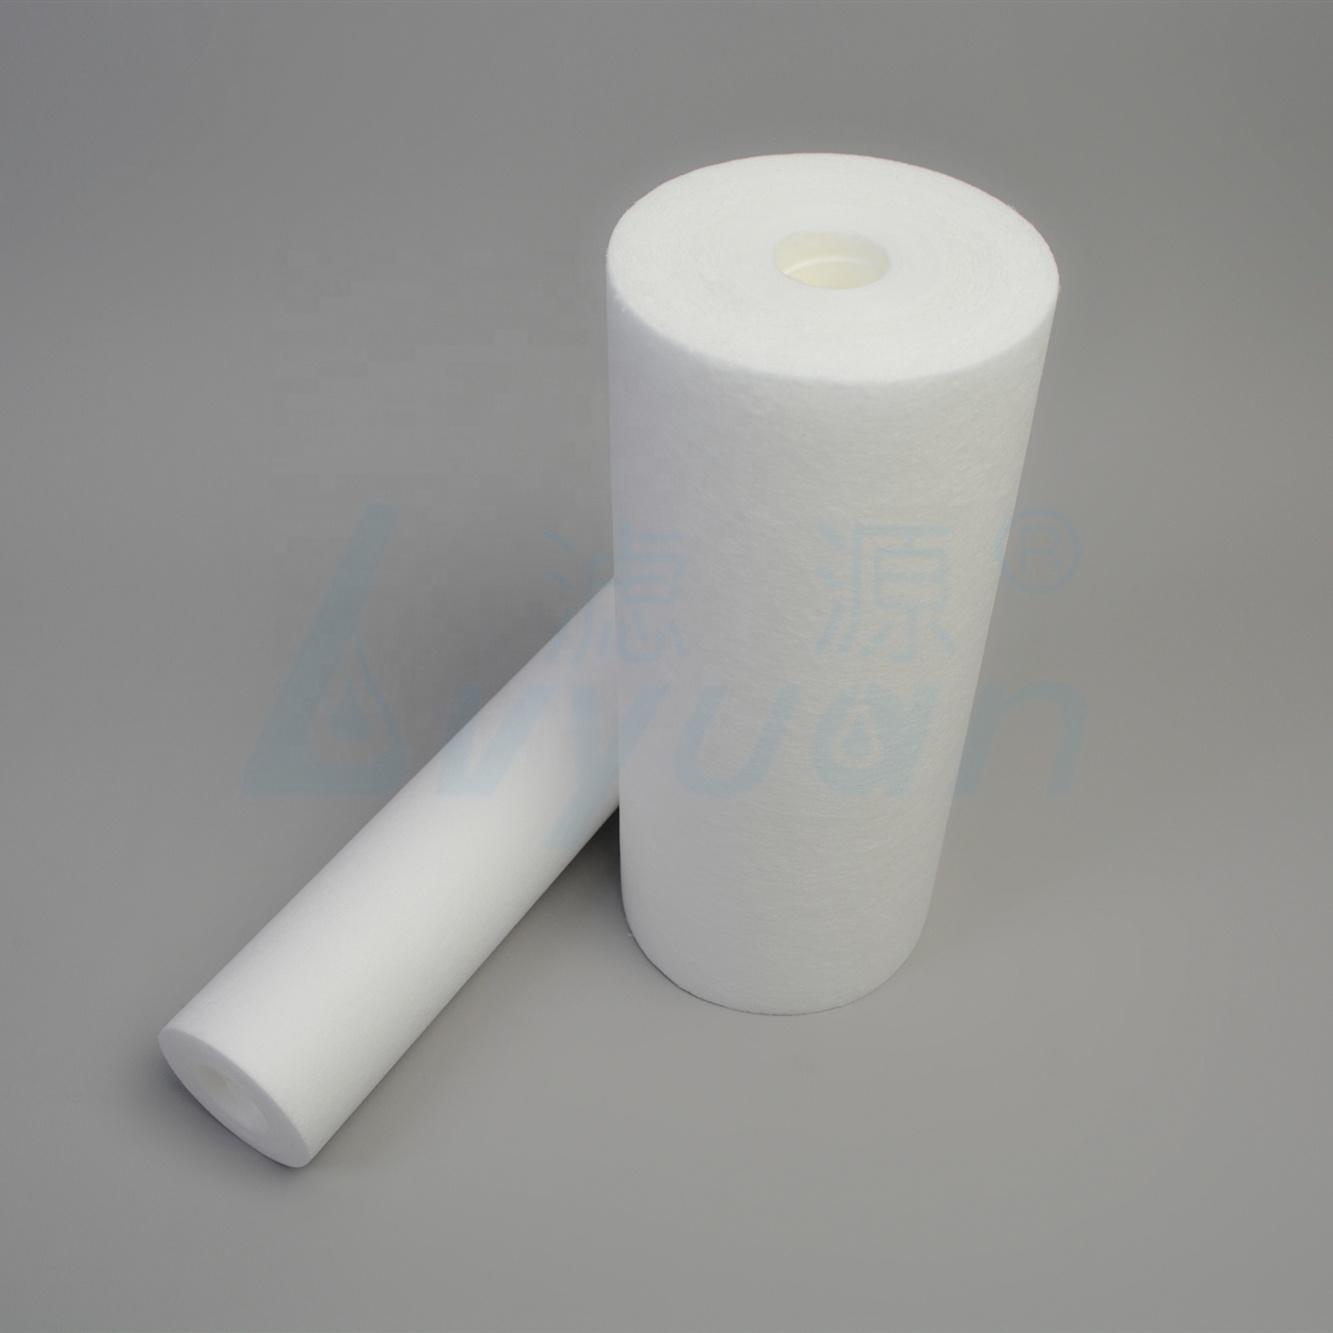 10 inch customized Double precision pp water filter cartridge filter sediment for water filter